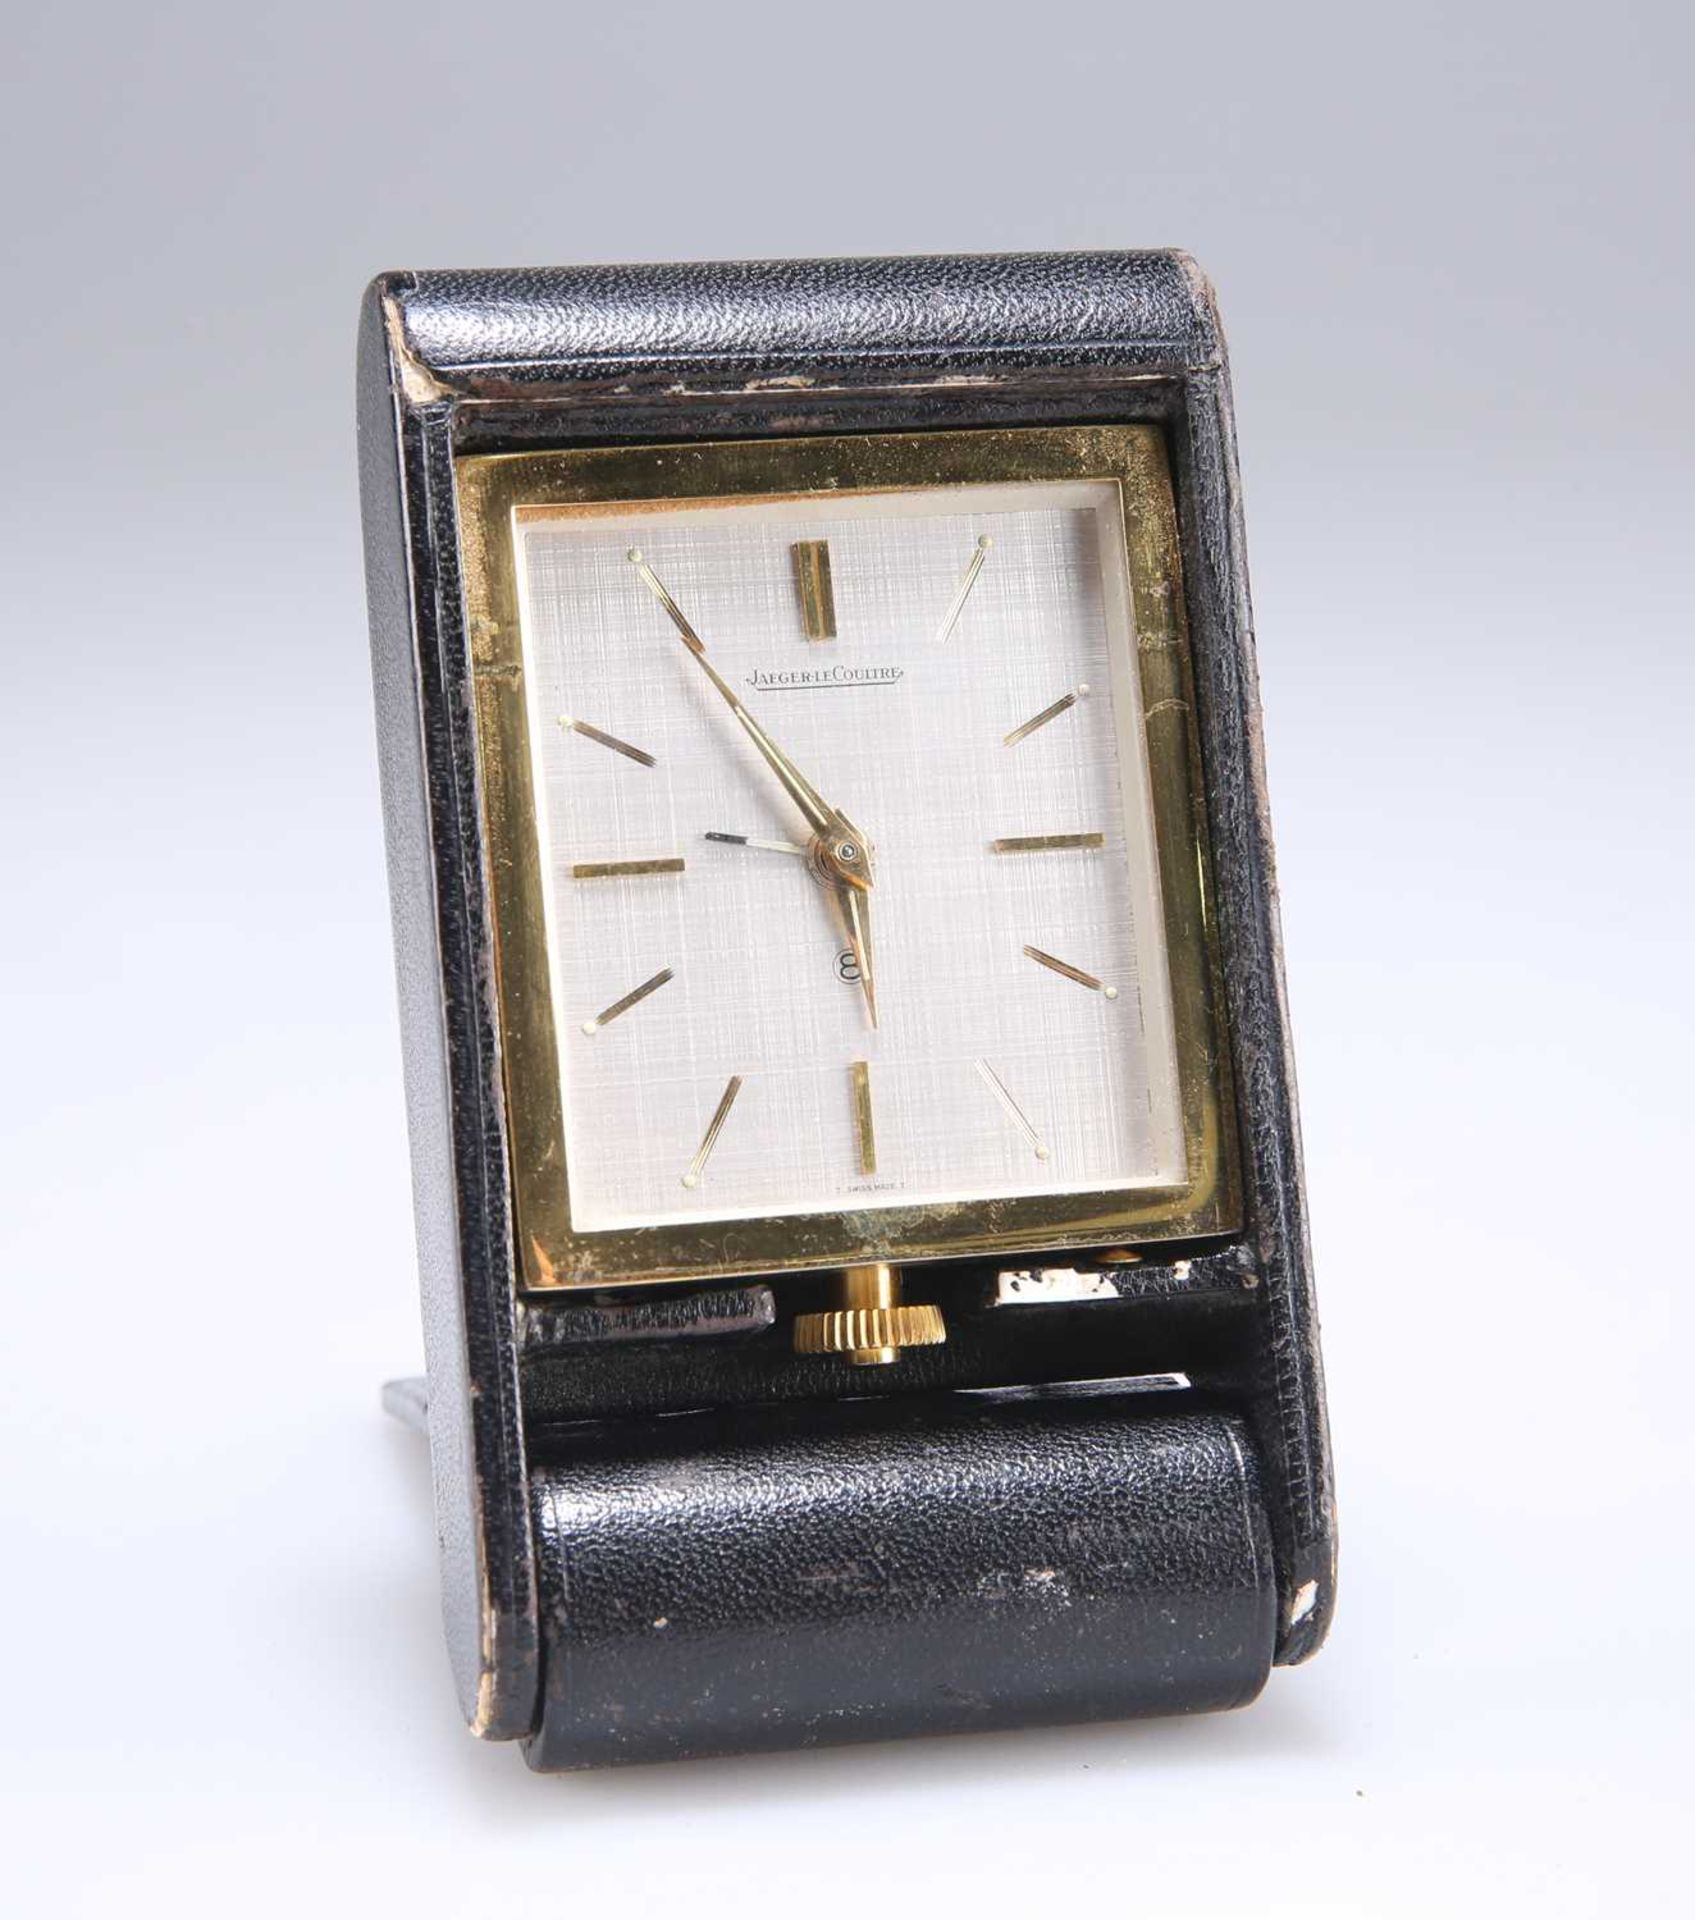 A JAEGER LECOULTRE BRASS 8-DAY TRAVEL ALARM CLOCK